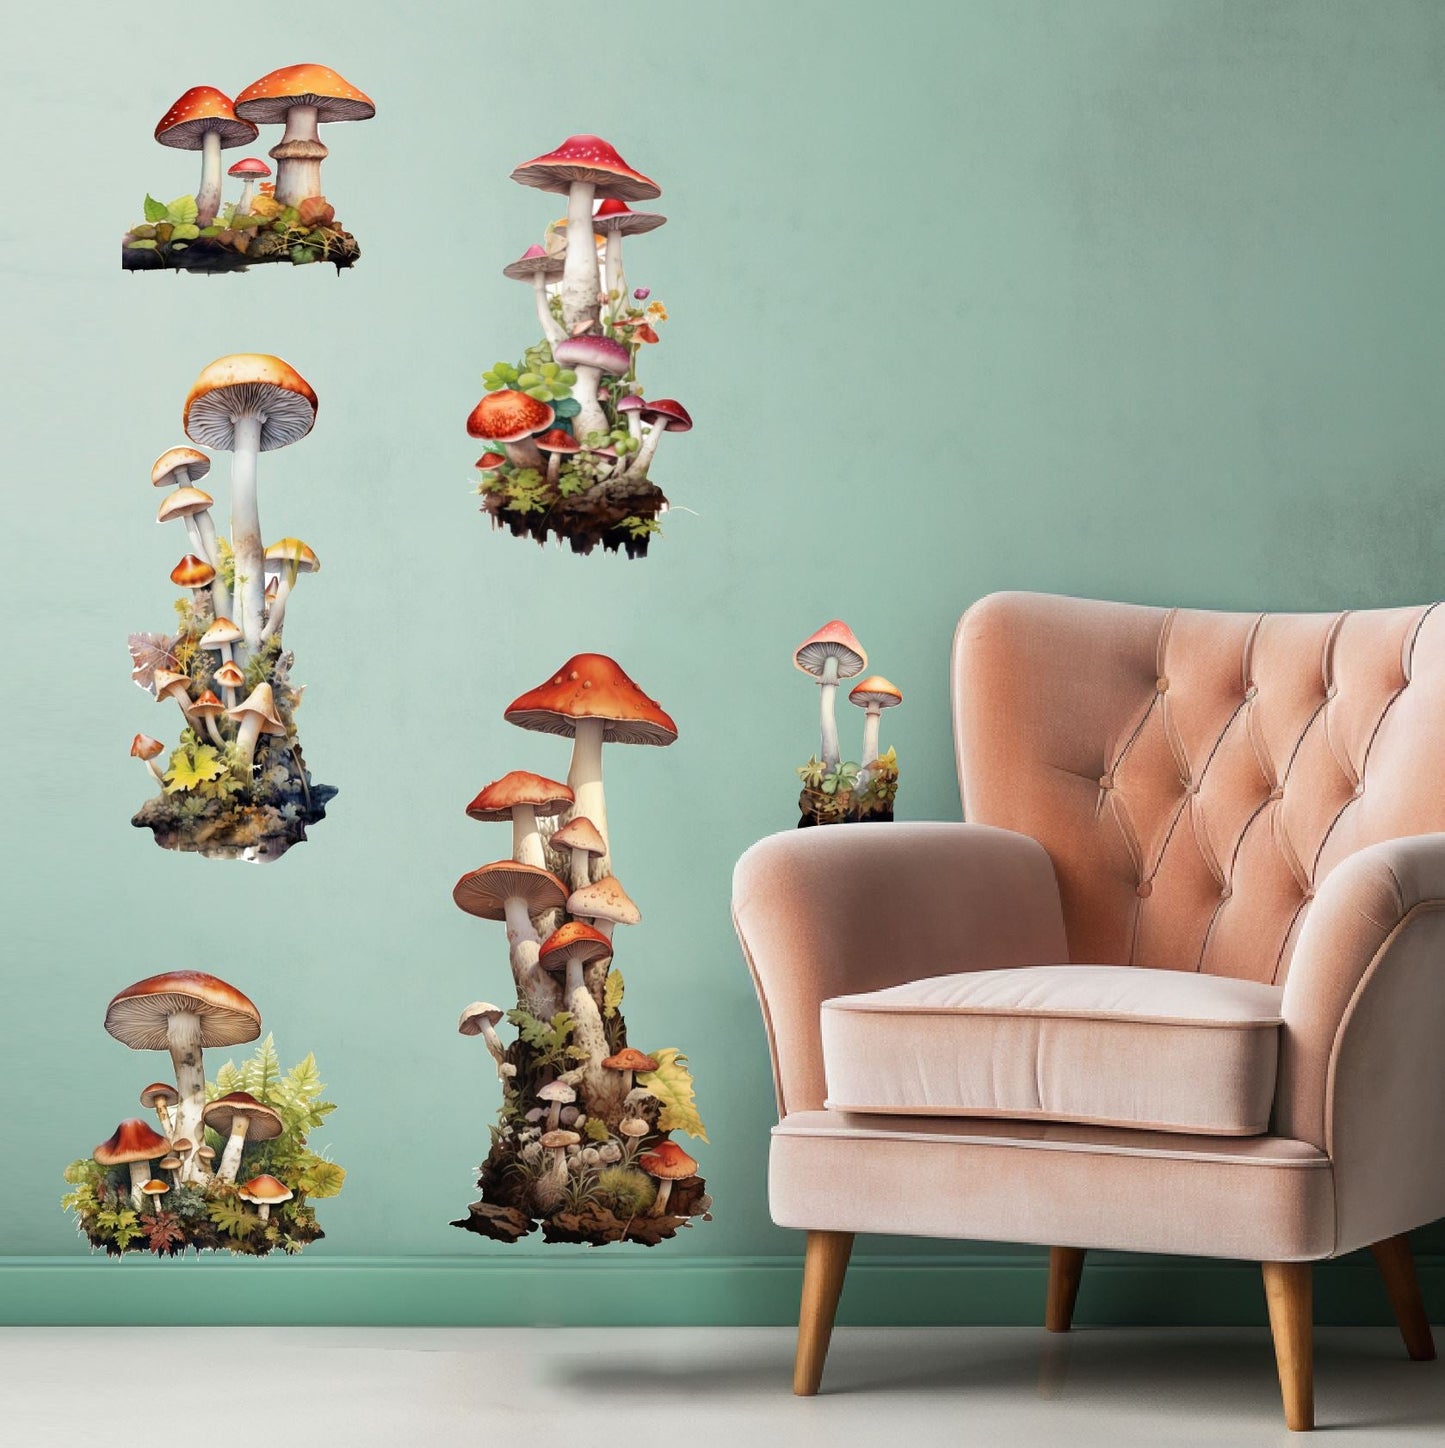 Mushroom Wall Decals | Mushroom Clusters Wall Stickers - Picture Perfect Decals